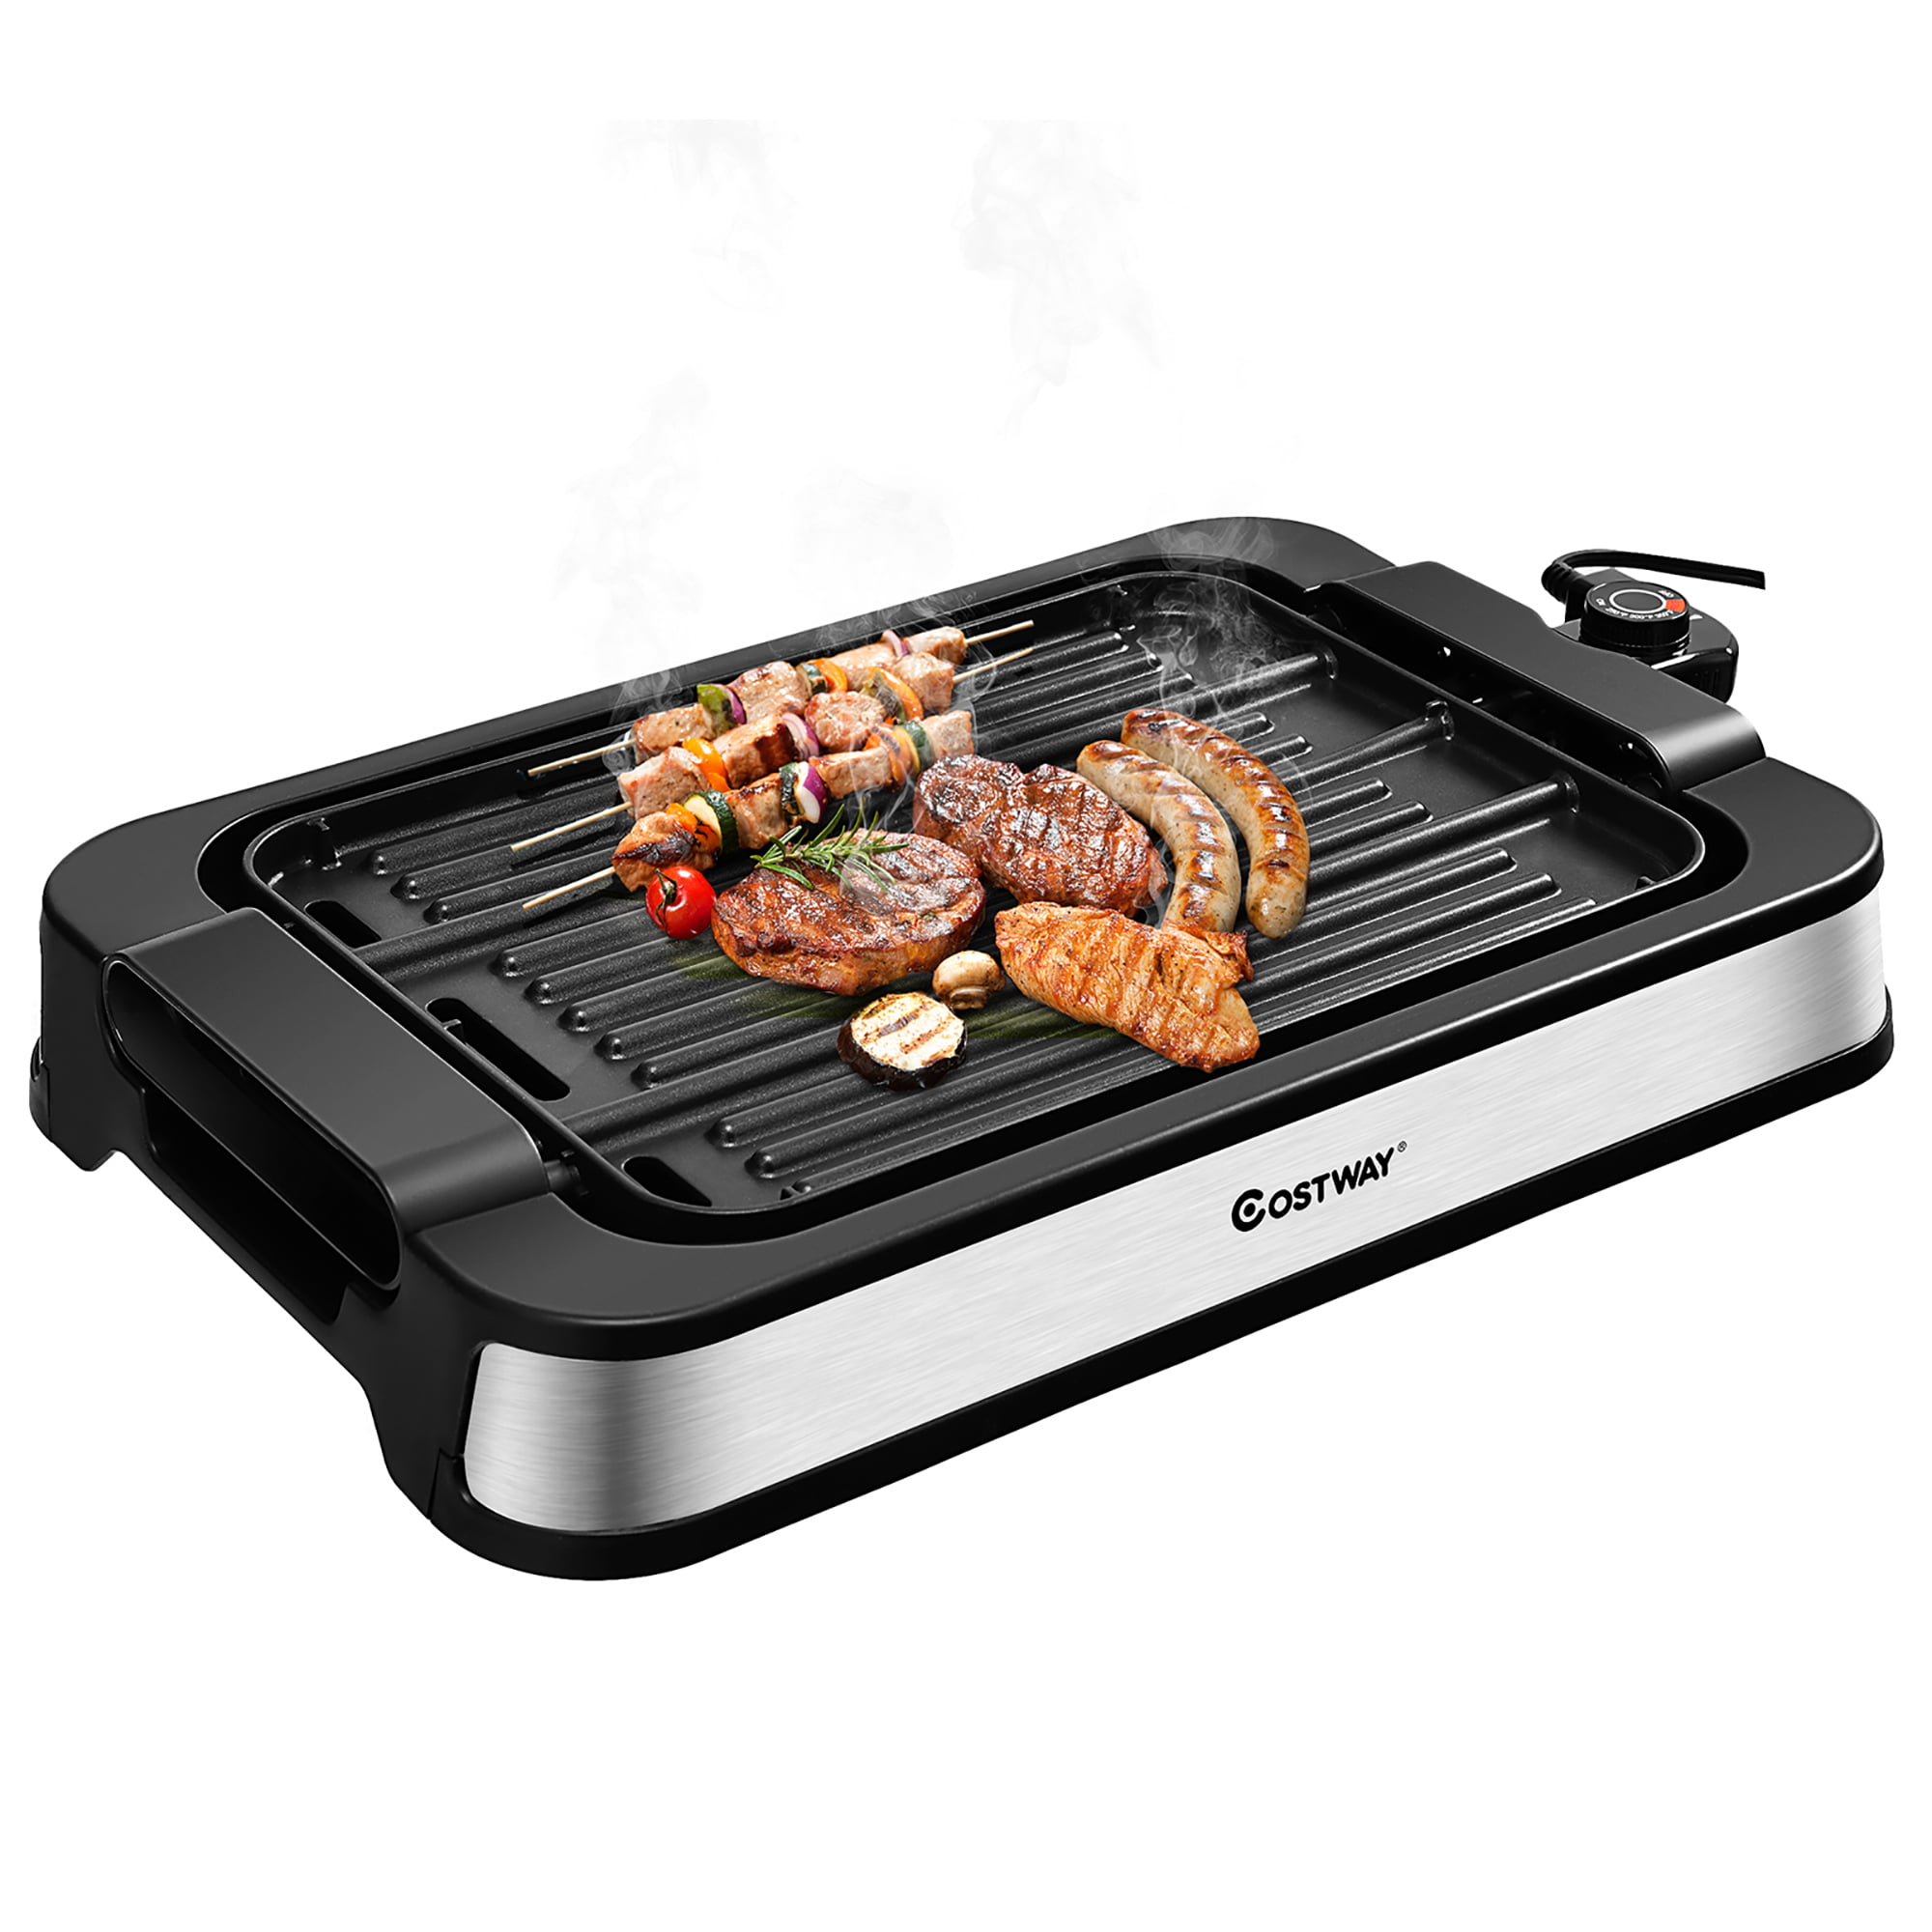 Electric Grill Household Indoor Barbecue Smokeless Grill Kebab Grill  Griddle электро гриль для кухни Cbistecchiera Elettrica - AliExpress